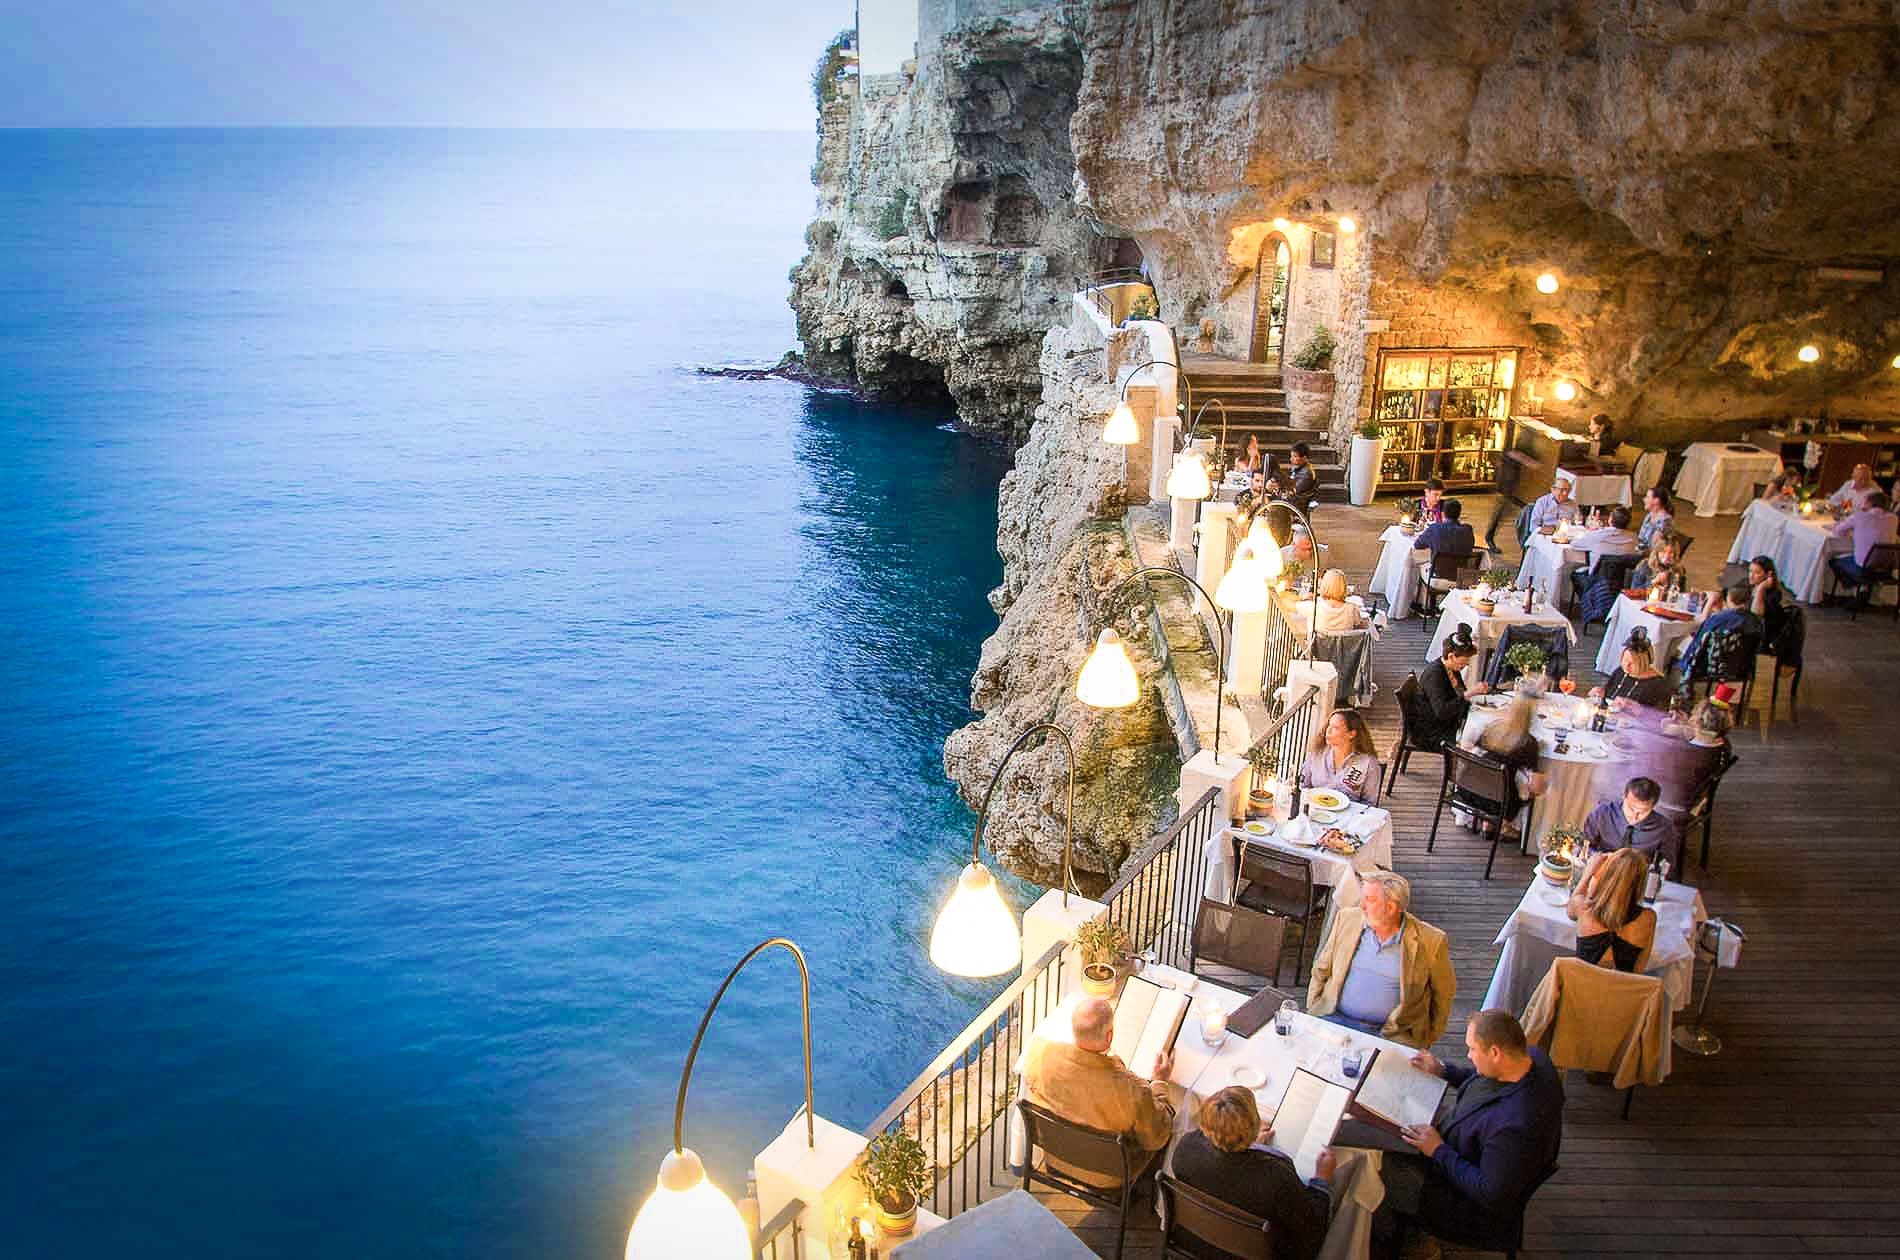 Incredible Restaurant Hostel Grotta Palazzese in Bari Italy next to the see luxury romatic restaurant with softline merbau shipdeck joint invisible fixation